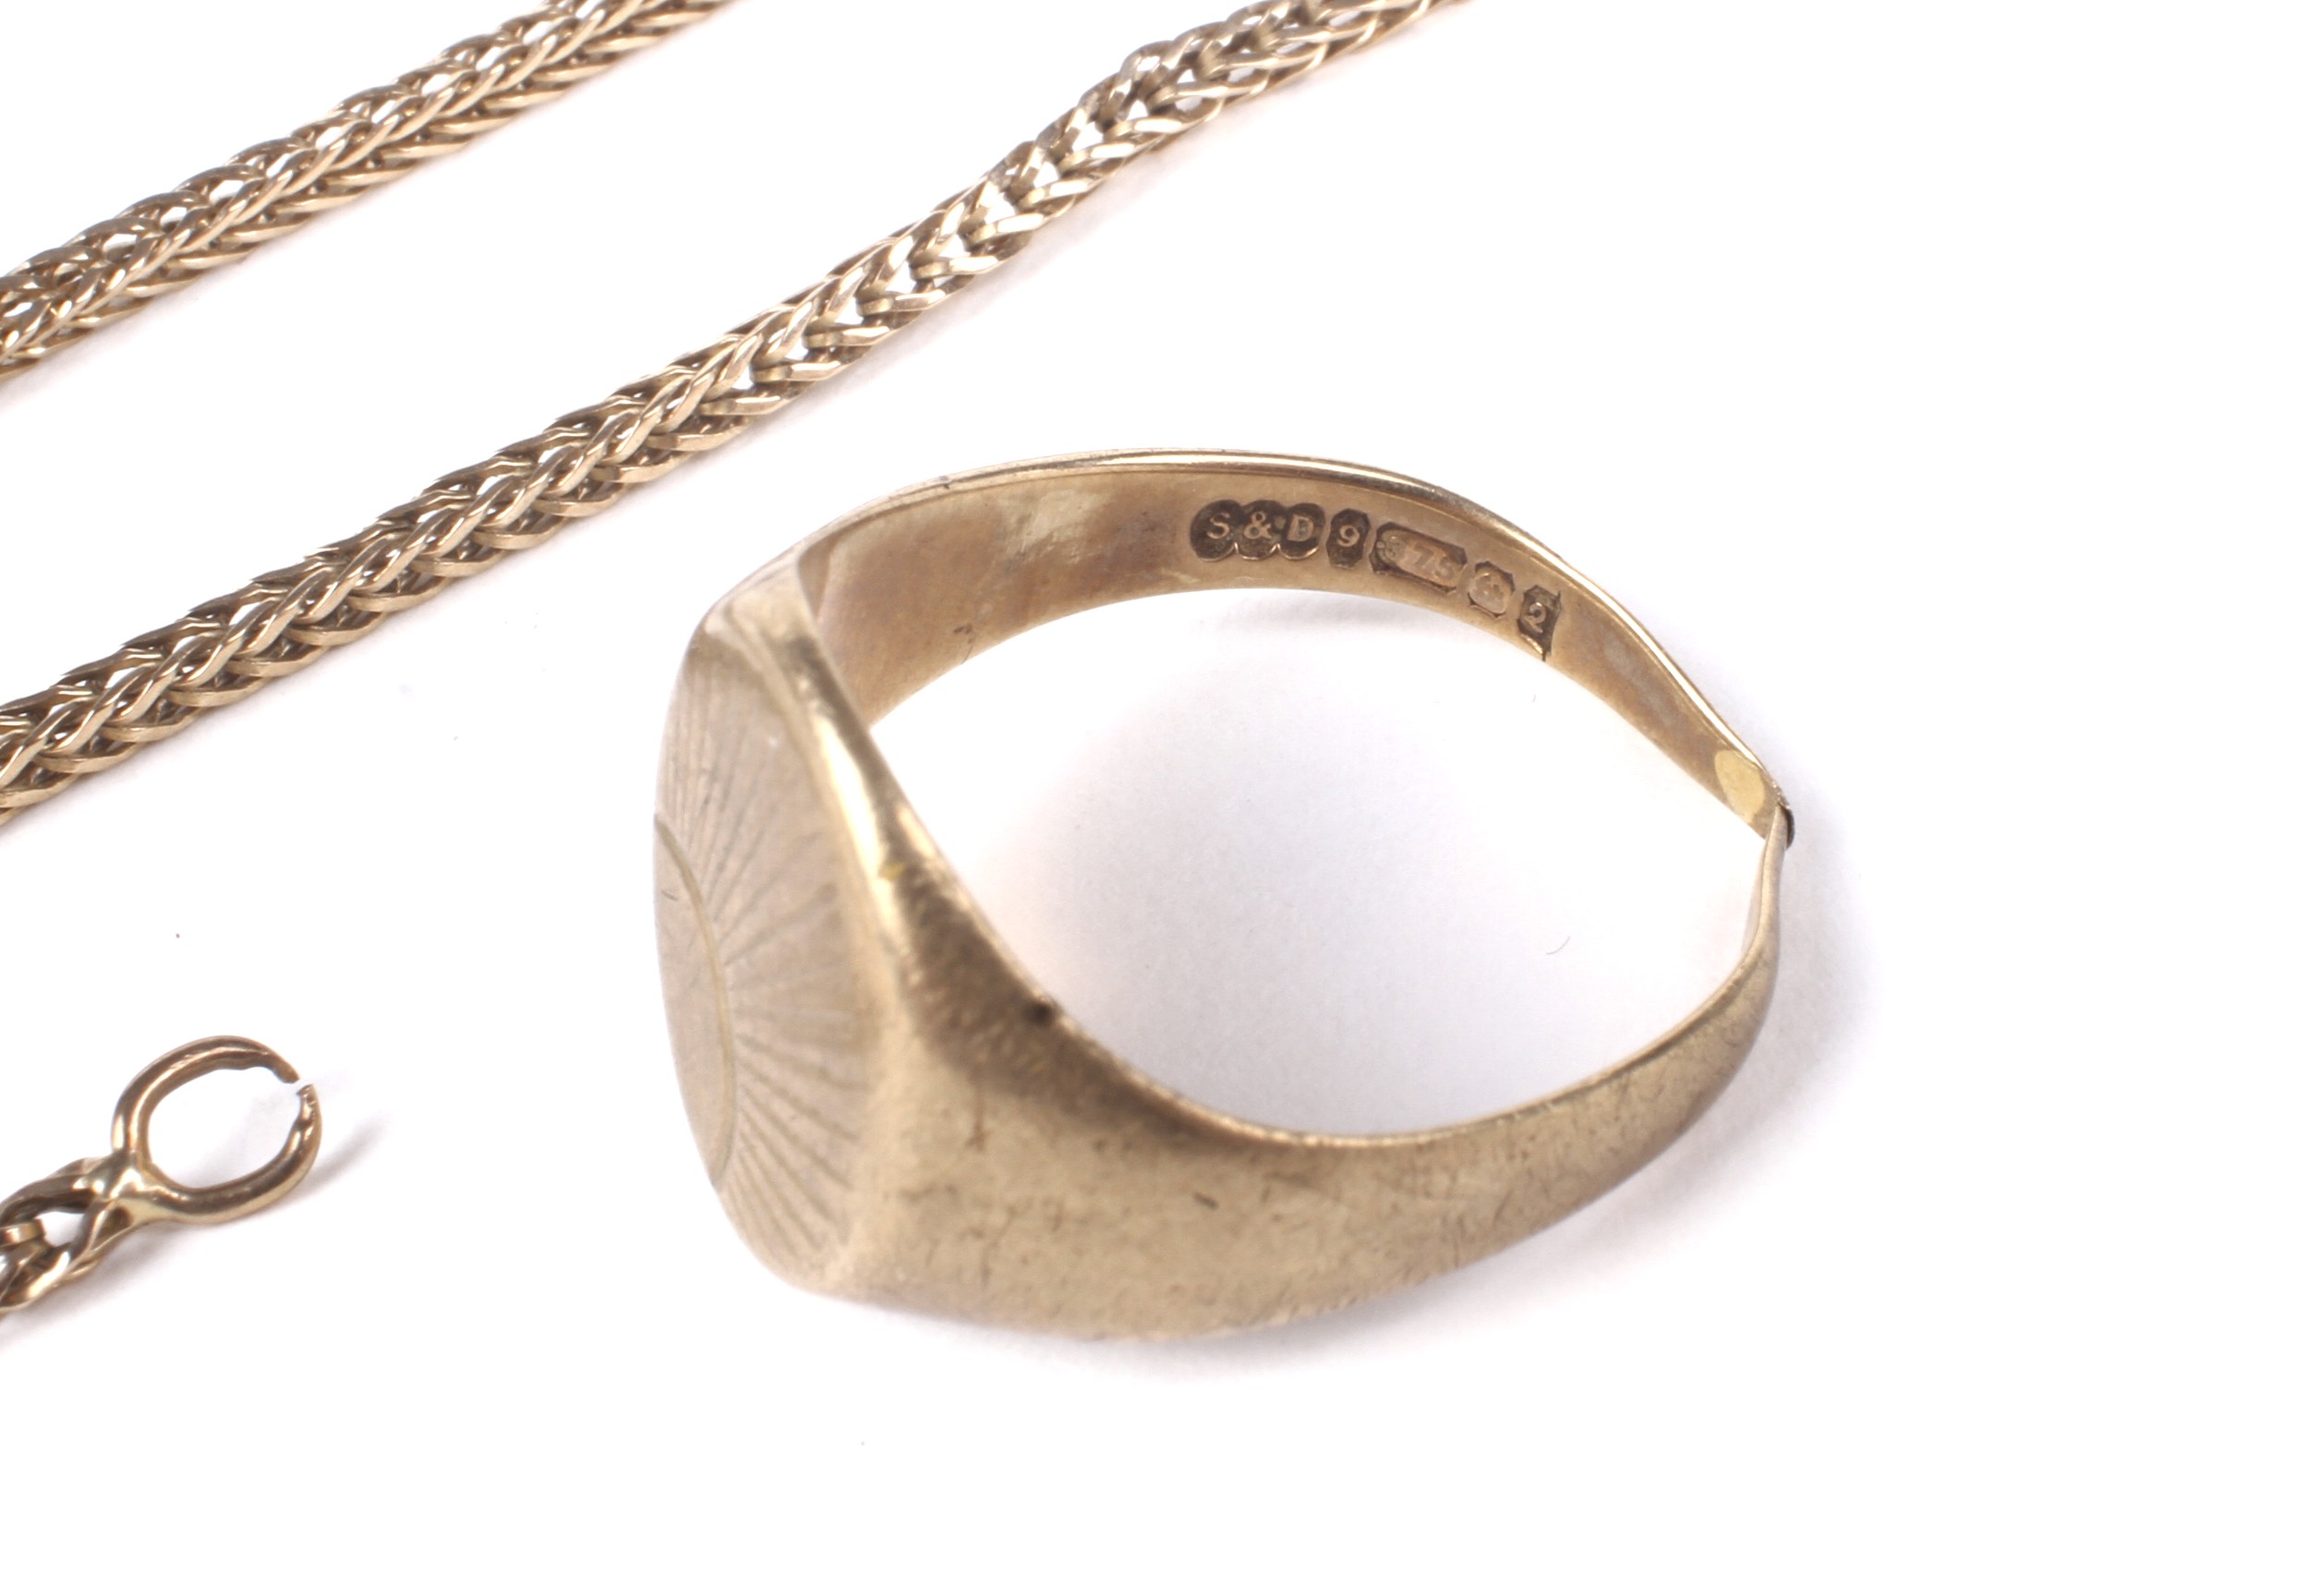 A vintage 9ct gold signet ring and various gold chains. - Image 2 of 2